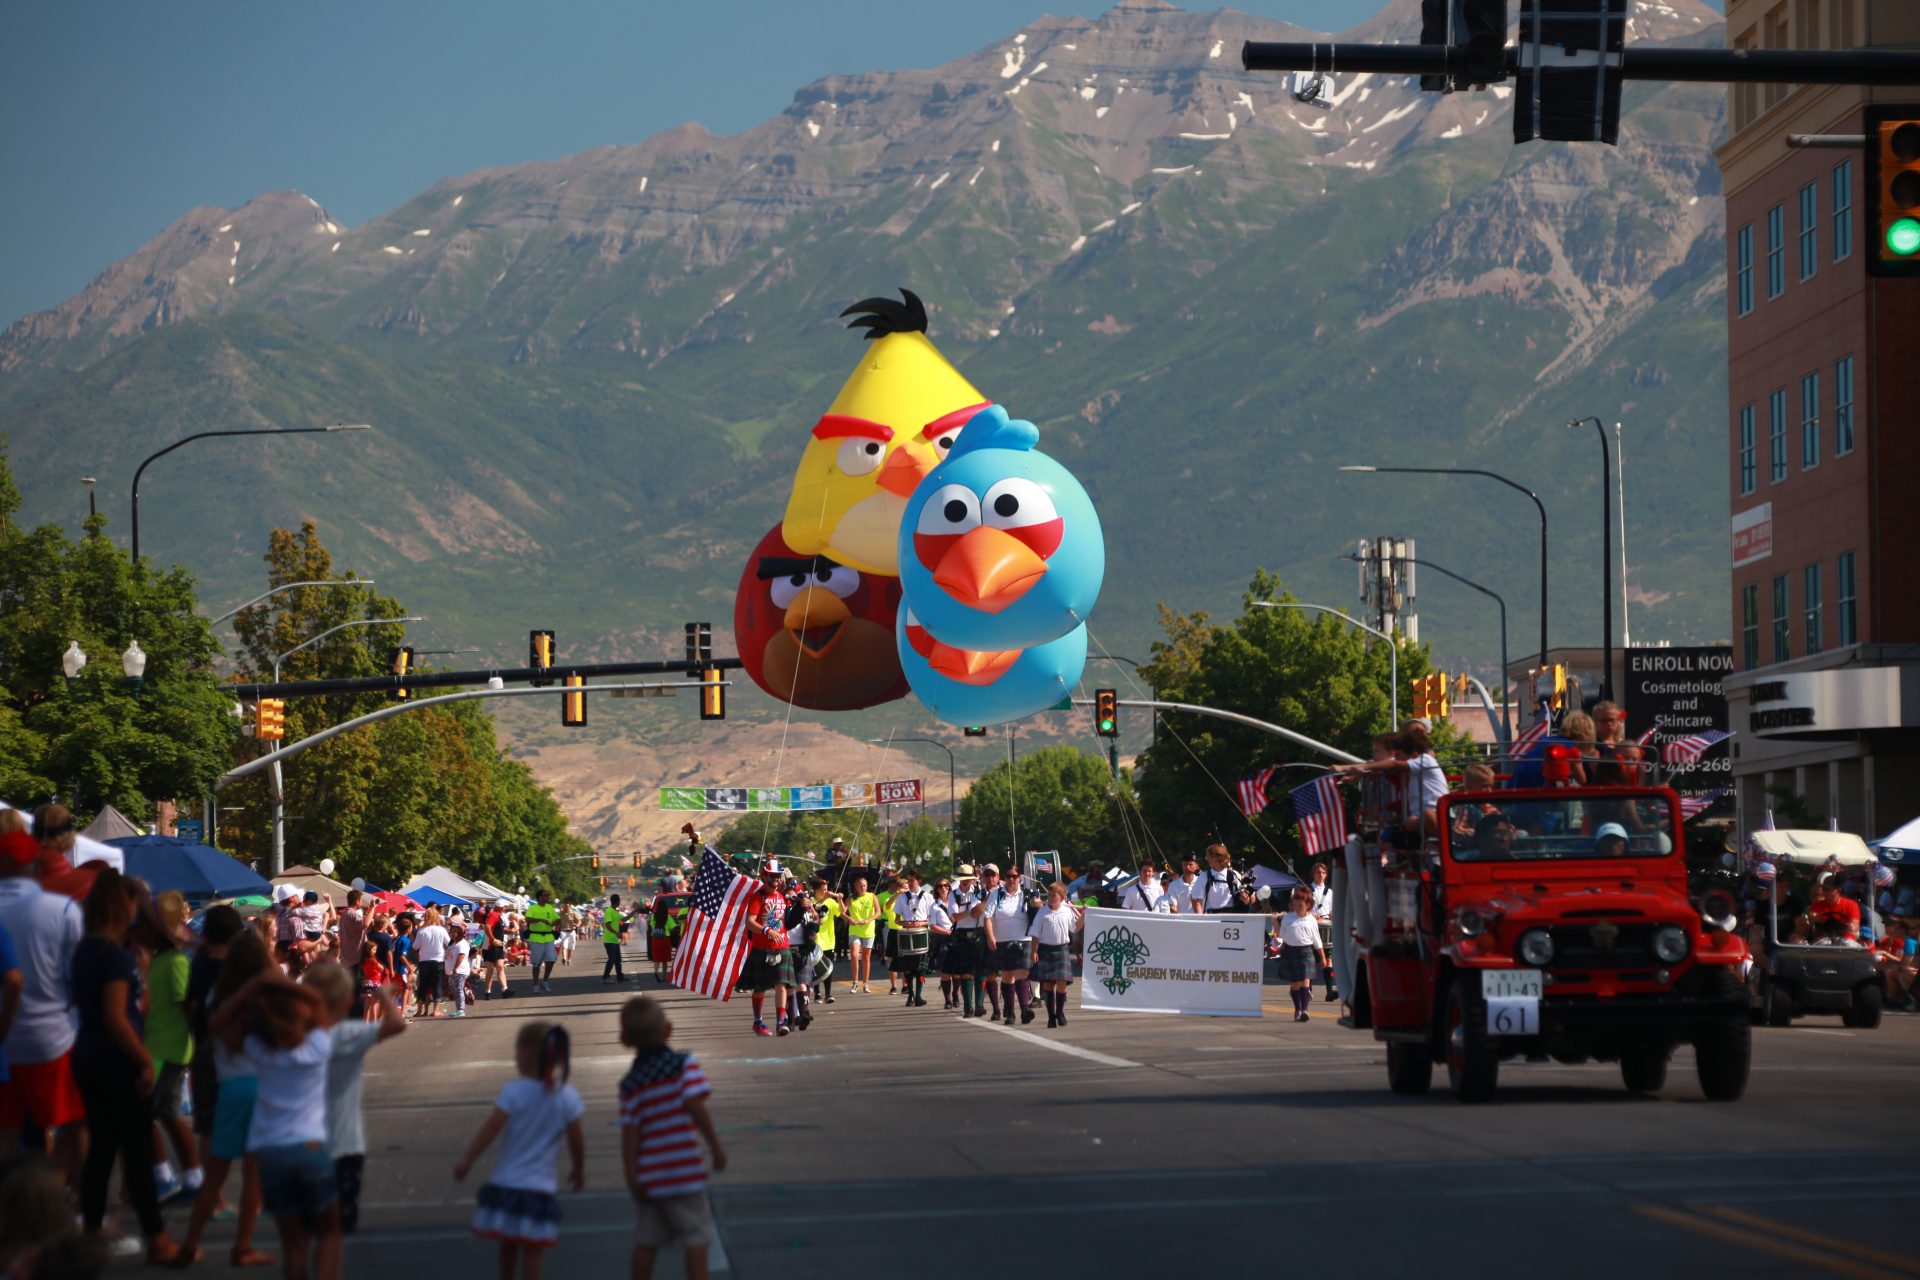 Utah summer festivals take varied responses to COVID19 The Daily